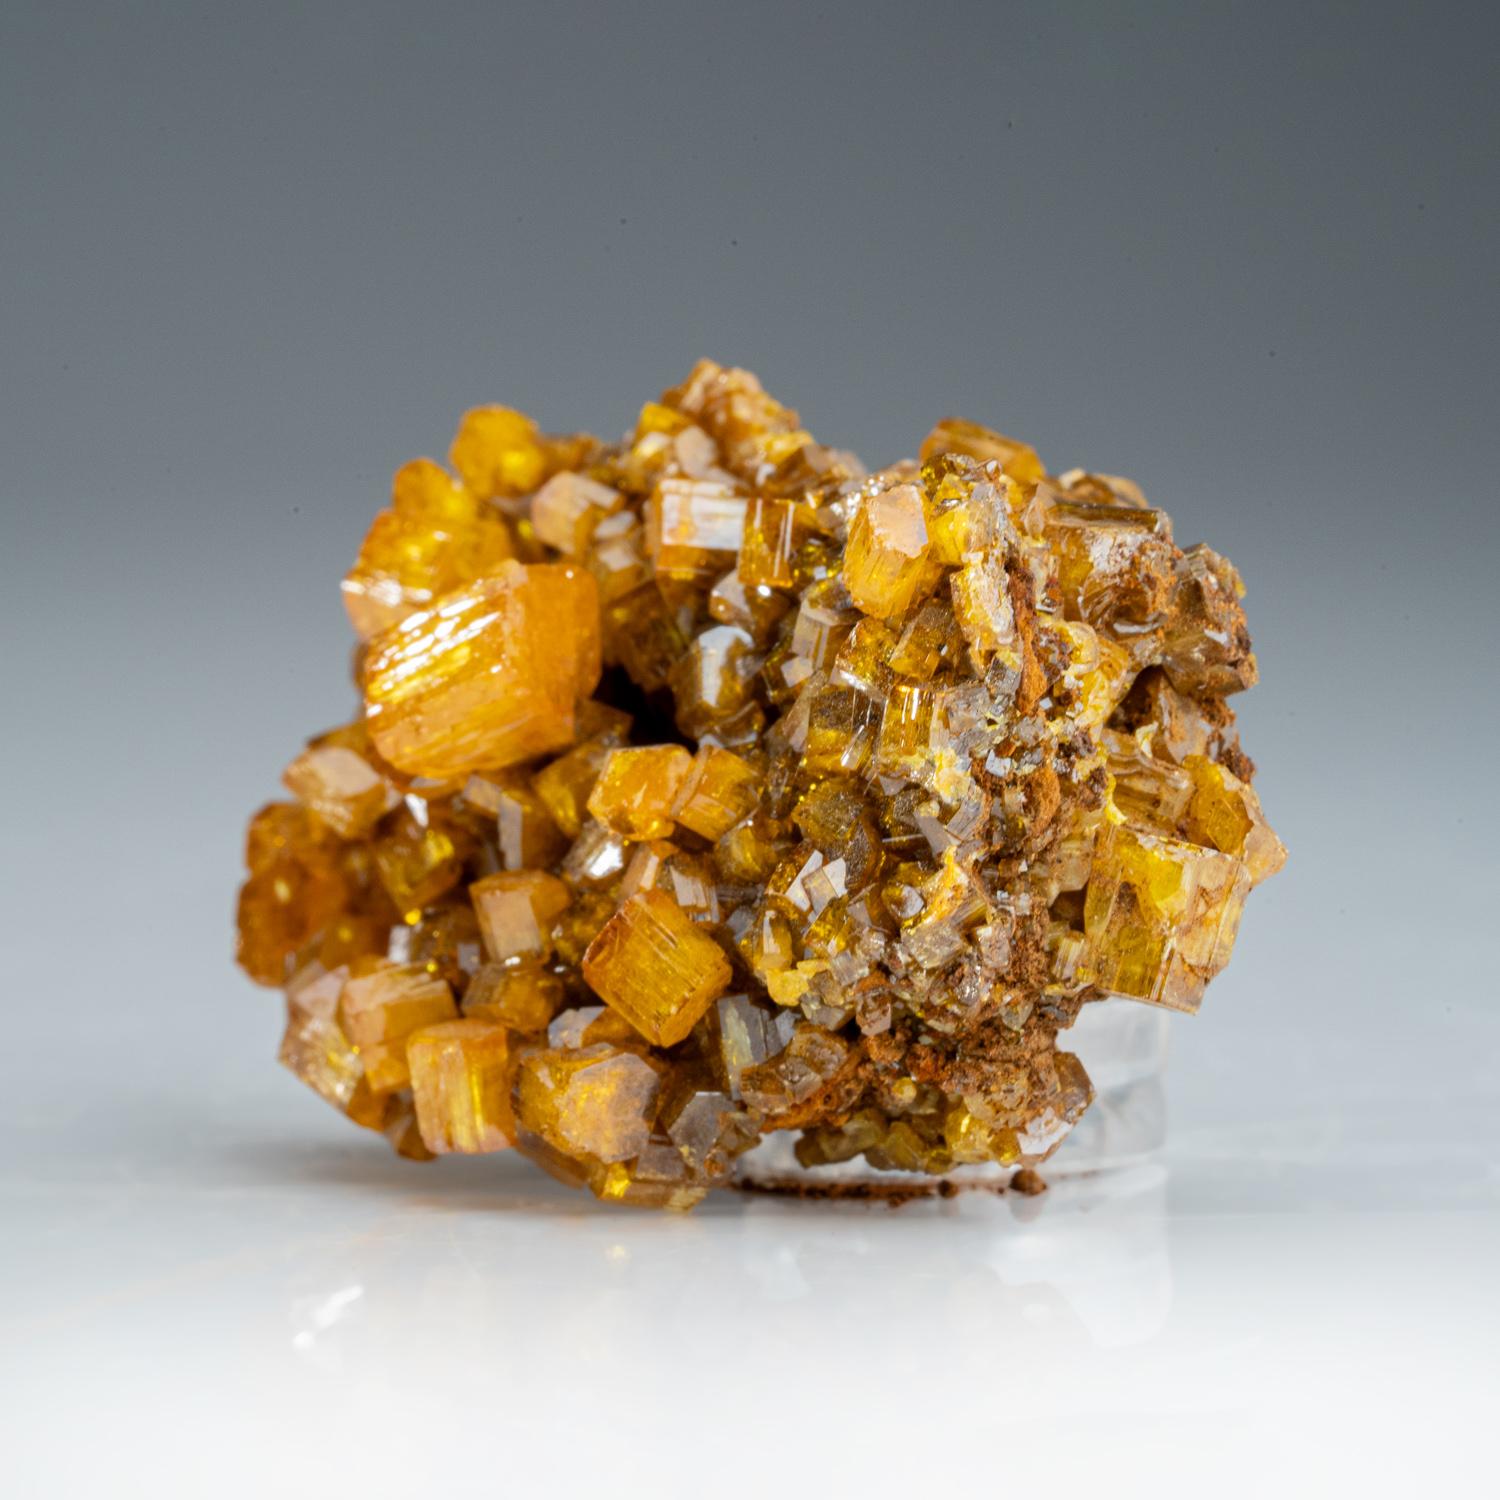 Contemporary Mimetite from Pingtouling Mine, Liannan, Guangdong Province, China